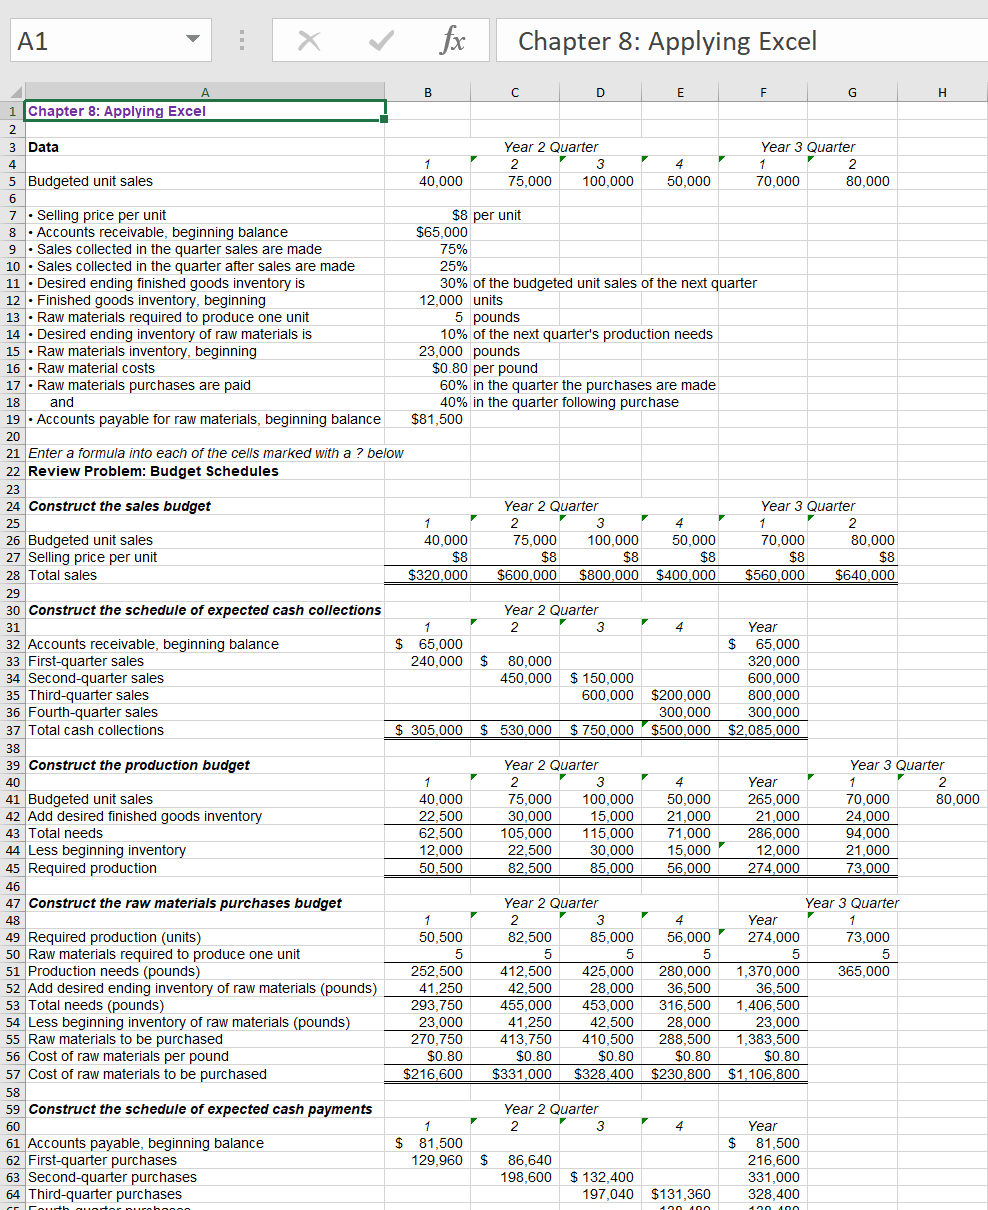 A1
fx
Chapter 8: Applying Excel
A
B
D
E
G
H
1 Chapter 8: Applying Excel
2
3 Data
Year 2 Quarter
Year 3 Quarter
4
1
3
4.
1
2
5 Budgeted unit sales
40,000
75,000
100.000
50,000
70,000
80.000
6
$8 per unit
$65,000
75%
7· Selling price per unit
8 · Accounts receivable, beginning balance
9 · Sales collected in the quarter sales are made
10 · Sales collected in the quarter after sales are made
11 · Desired ending finished goods inventory is
12 • Finished goods inventory, beginning
13 · Raw materials required to produce one unit
14 • Desired ending inventory of raw materials is
15 · Raw materials inventory, beginning
16 · Raw material costs
17 · Raw materials purchases are paid
25%
30% of the budgeted unit sales of the next quarter
12,000 units
5 pounds
10% of the next quarter's production needs
23,000 pounds
$0.80 per pound
60% in the quarter the purchases are made
40% in the quarter following purchase
$81,500
18
and
19 · Accounts payable for raw materials, beginning balance
20
21 Enter a formula into each of the cells marked with a ? below
22 Review Problem: Budget Schedules
23
24 Construct the sales budget
Year 2 Quarter
Year 3 Quarter
25
1
2
3
1
26 Budgeted unit sales
27 Selling price per unit
28 Total sales
40,000
$8
$320,000
50,000
$8
$800,000 $400,000
70.000
$8
80,000
$8
$640,000
75,000
100,000
$8
$8
$600,000
$560,000
29
Year 2 Quarter
30 Construct the schedule of expected cash collections
31
1
2
3
4
Year
$ 65,000
$
32 Accounts receivable, beginning balance
65,000
33 First-quarter sales
34 Second-quarter sales
35 Third-quarter sales
36 Fourth-quarter sales
37 Total cash collections
240,000
80,000
320,000
450,000
$ 150,000
600,000
600,000 $200,000
800,000
300,000
$500,000
300,000
$2,085,000
$ 305,000
$ 530.000
$ 750,000
38
39 Construct the production budget
Year 2 Quarter
Year 3 Quarter
40
1
2
3
4
Year
2
100,000
50,000
265,000
70,000
41 Budgeted unit sales
42 Add desired finished goods inventory
43 Total needs
44 Less beginning inventory
45 Required production
40,000
75,000
30.000
80,000
22,500
15,000
21,000
21,000
24.000
62,500
12,000
50,500
115,000
30,000
105,000
71,000
286,000
94,000
15,000
56,000
22,500
12,000
21,000
82,500
85,000
274,000
73,000
46
47 Construct the raw materials purchases budget
Year 2 Quarter
Year 3 Quarter
48
1
3
4
Year
49 Required production (units)
50 Raw materials required to produce one unit
51 Production needs (pounds)
52 Add desired ending inventory of raw materials (pounds)
53 Total needs (pounds)
54 Less beginning inventory of raw materials (pounds)
55 Raw materials to be purchased
56 Cost of raw materials per pound
57 Cost of raw materials to be purchased
50,500
82,500
85,000
56,000
274,000
73,000
252,500
412.500
425.000
280,000
1,370,000
365,000
41.250
42,500
28,000
36.500
36.500
316,500
293,750
23,000
270,750
$0.80
455,000
41,250
413,750
$0.80
$331,000
453.000
1,406,500
42,500
410,500
$0.80
$328.400
28,000
288,500
$0.80
$230,800 $1,106,800
23,000
1,383,500
$0.80
$216,600
58
59 Construct the schedule of expected cash payments
Year 2 Quarter
60
3
4
Year
$ 81,500
129,960 $ 86,640
61 Accounts payable, beginning balance
62 First-quarter purchases
63 Second-quarter purchases
64 Third-quarter purchases
$ 81,500
216,600
198,600 $ 132,400
331.000
197,040
$131,360
328,400
cr Couurth quortor purohooo
120 400
